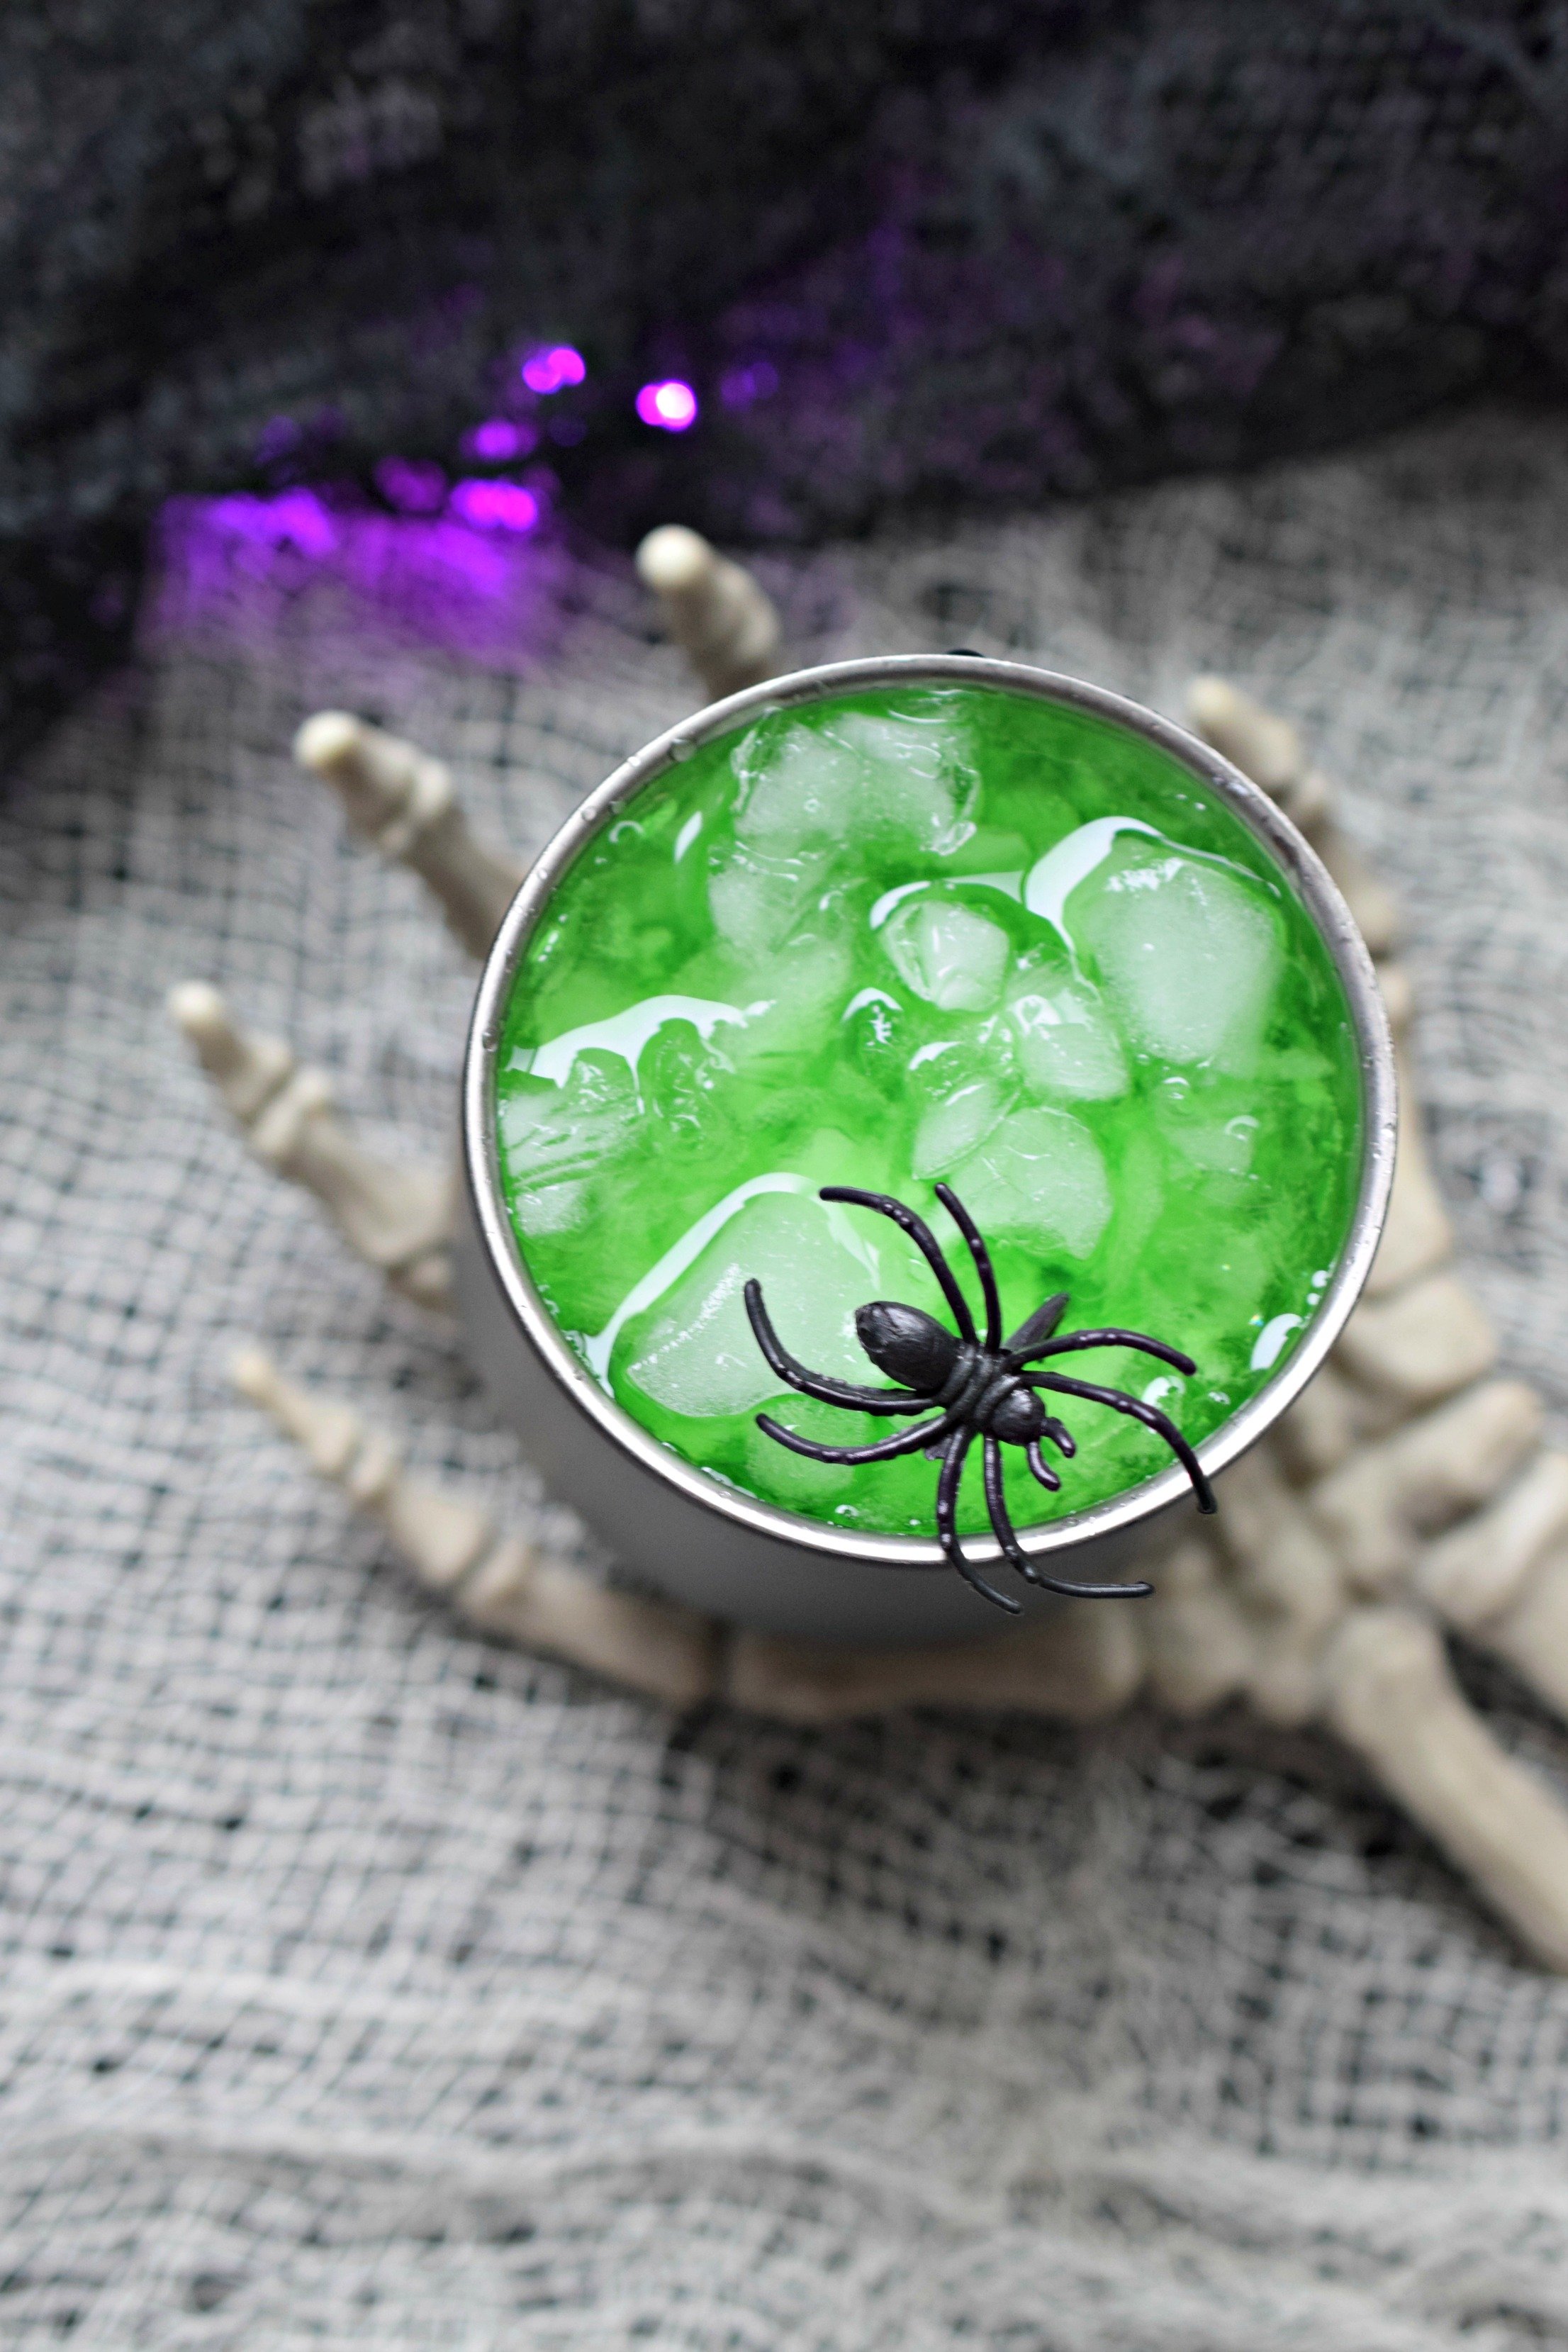 Need a fun but easy to make Halloween cocktail. Phantom Potion is party perfect! Simple to make, it looks eerie and tastes great.